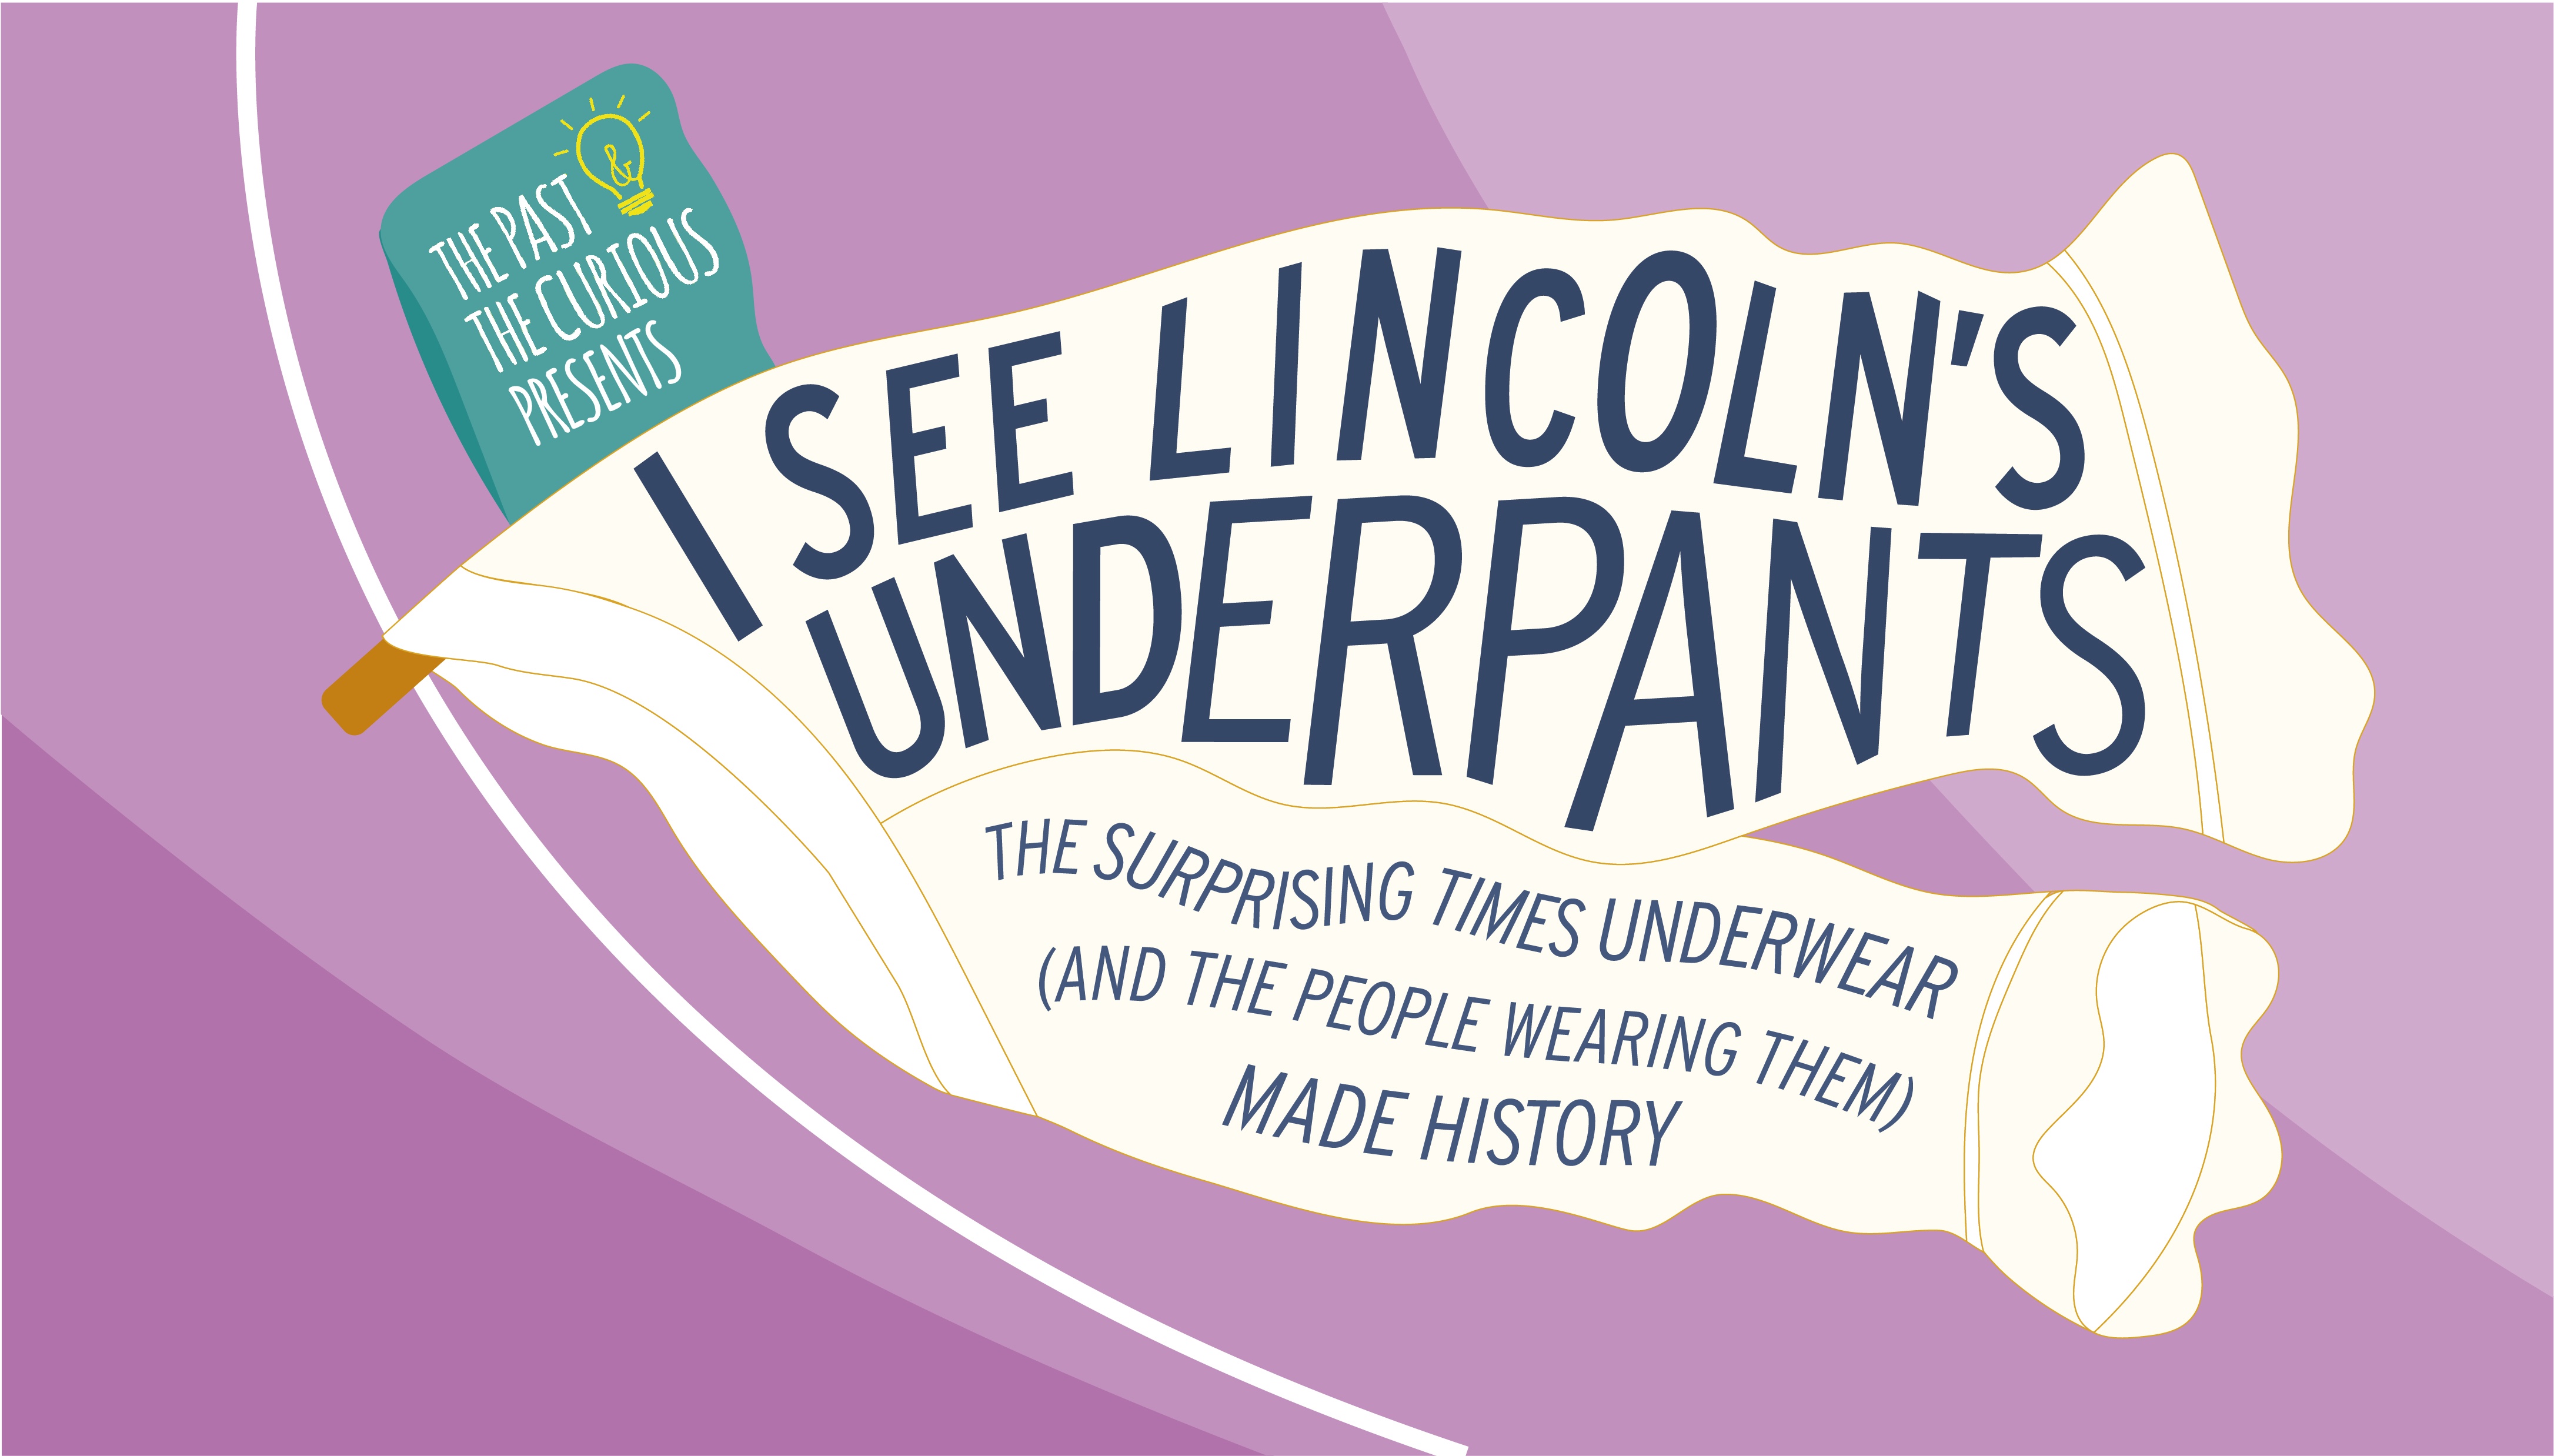 I Wonder What's Under There?: A Brief History of Underwear (A Lift-the-Flap  Book)